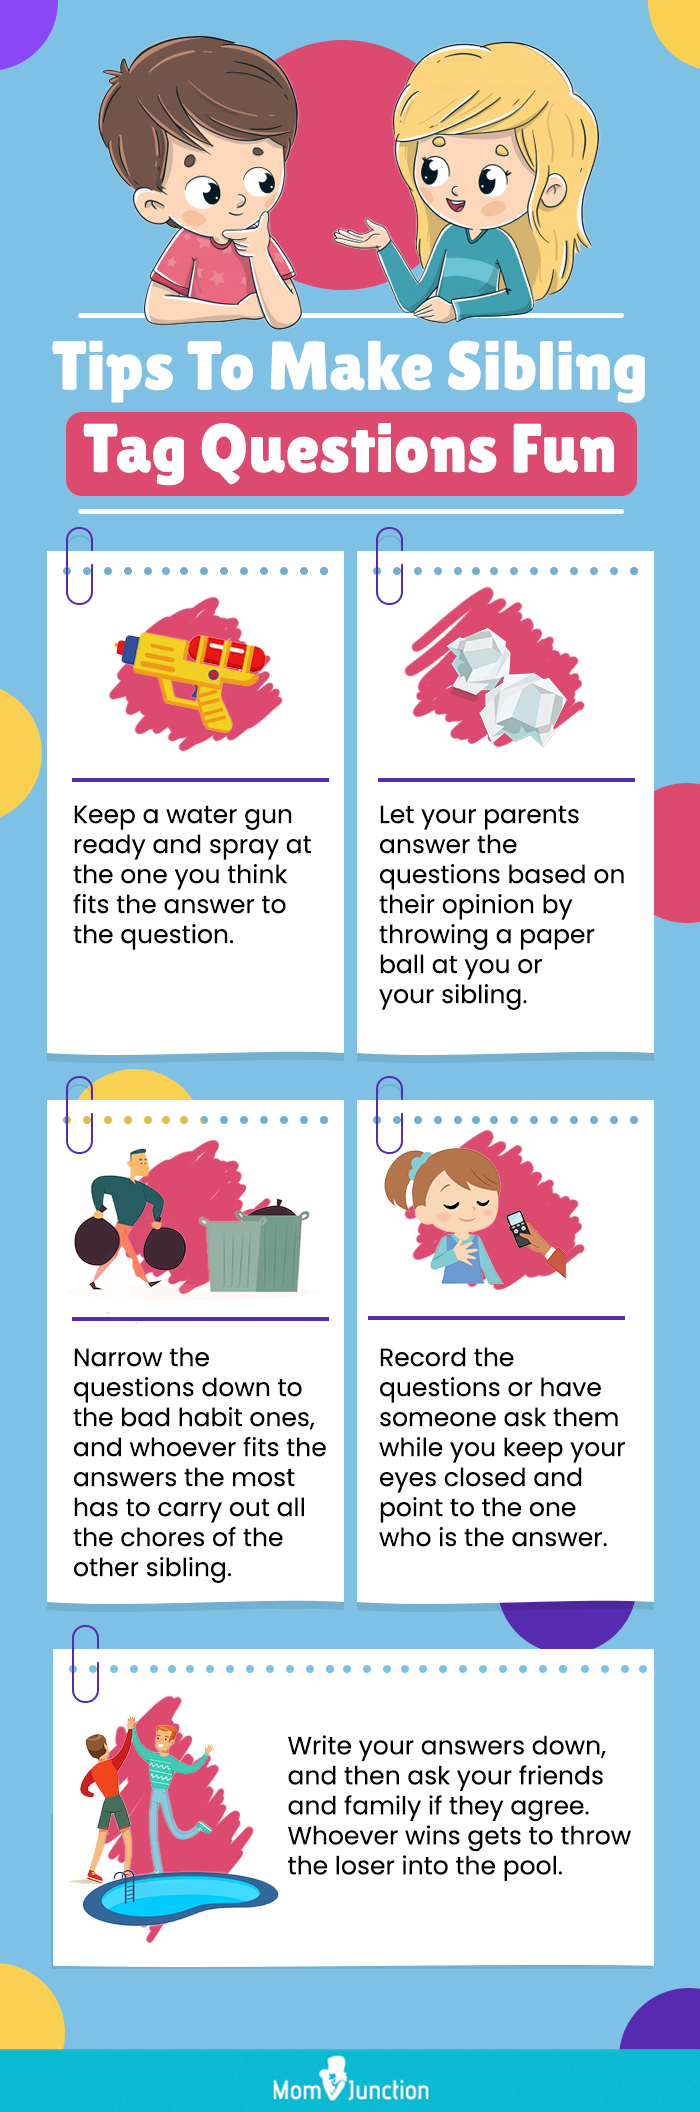 tips on sibling tag questions [infographic]